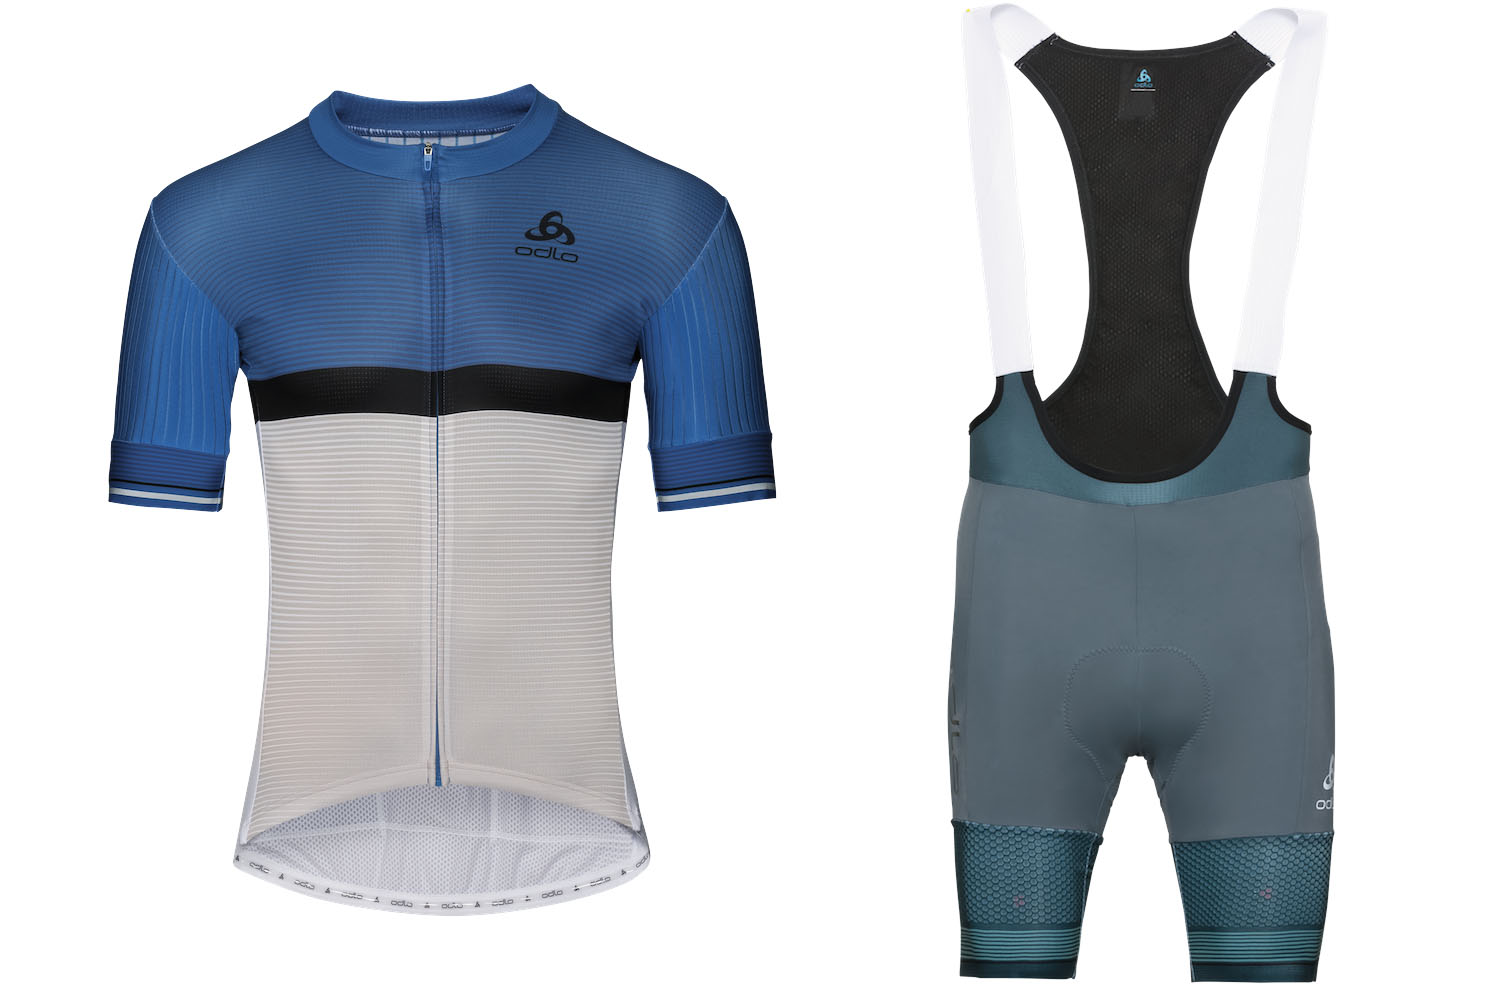 Odlo's summer range features Ceramicool active cooling tech